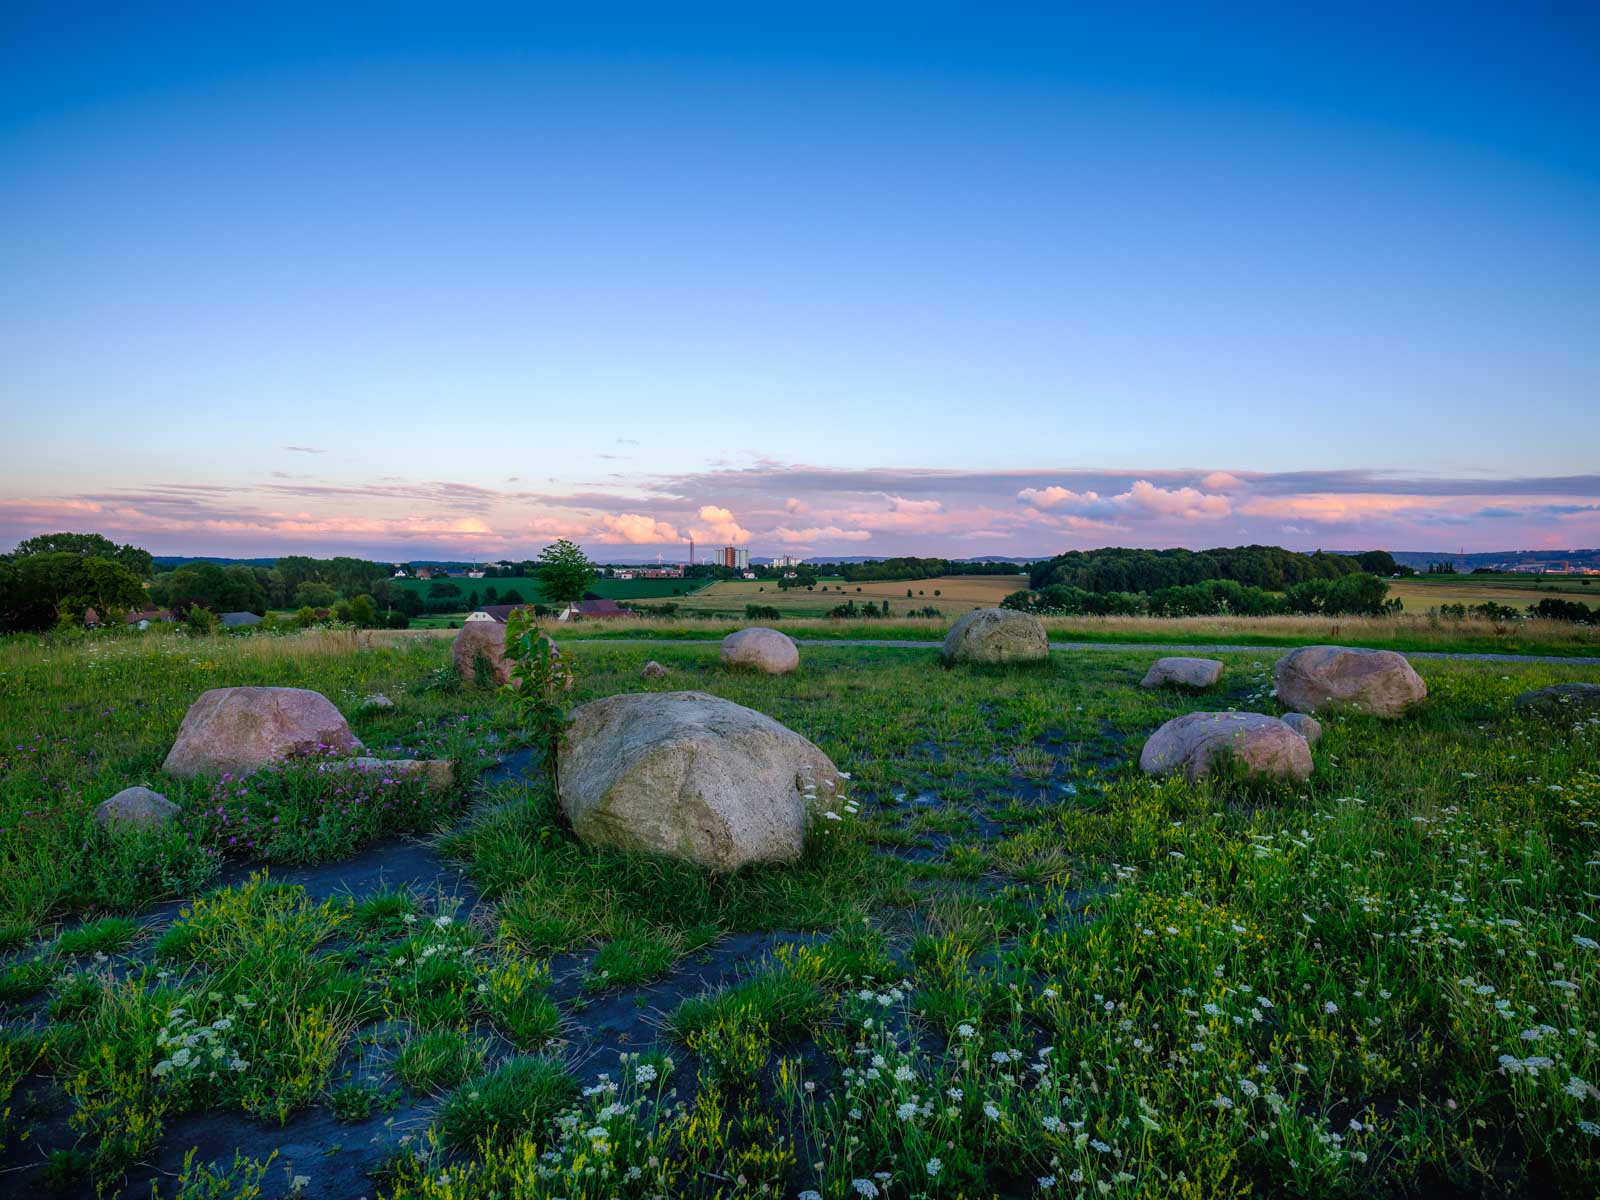 Landscape with erratic rocks at 'Johannisbach' in July 2020 (Bielefeld, Germany).